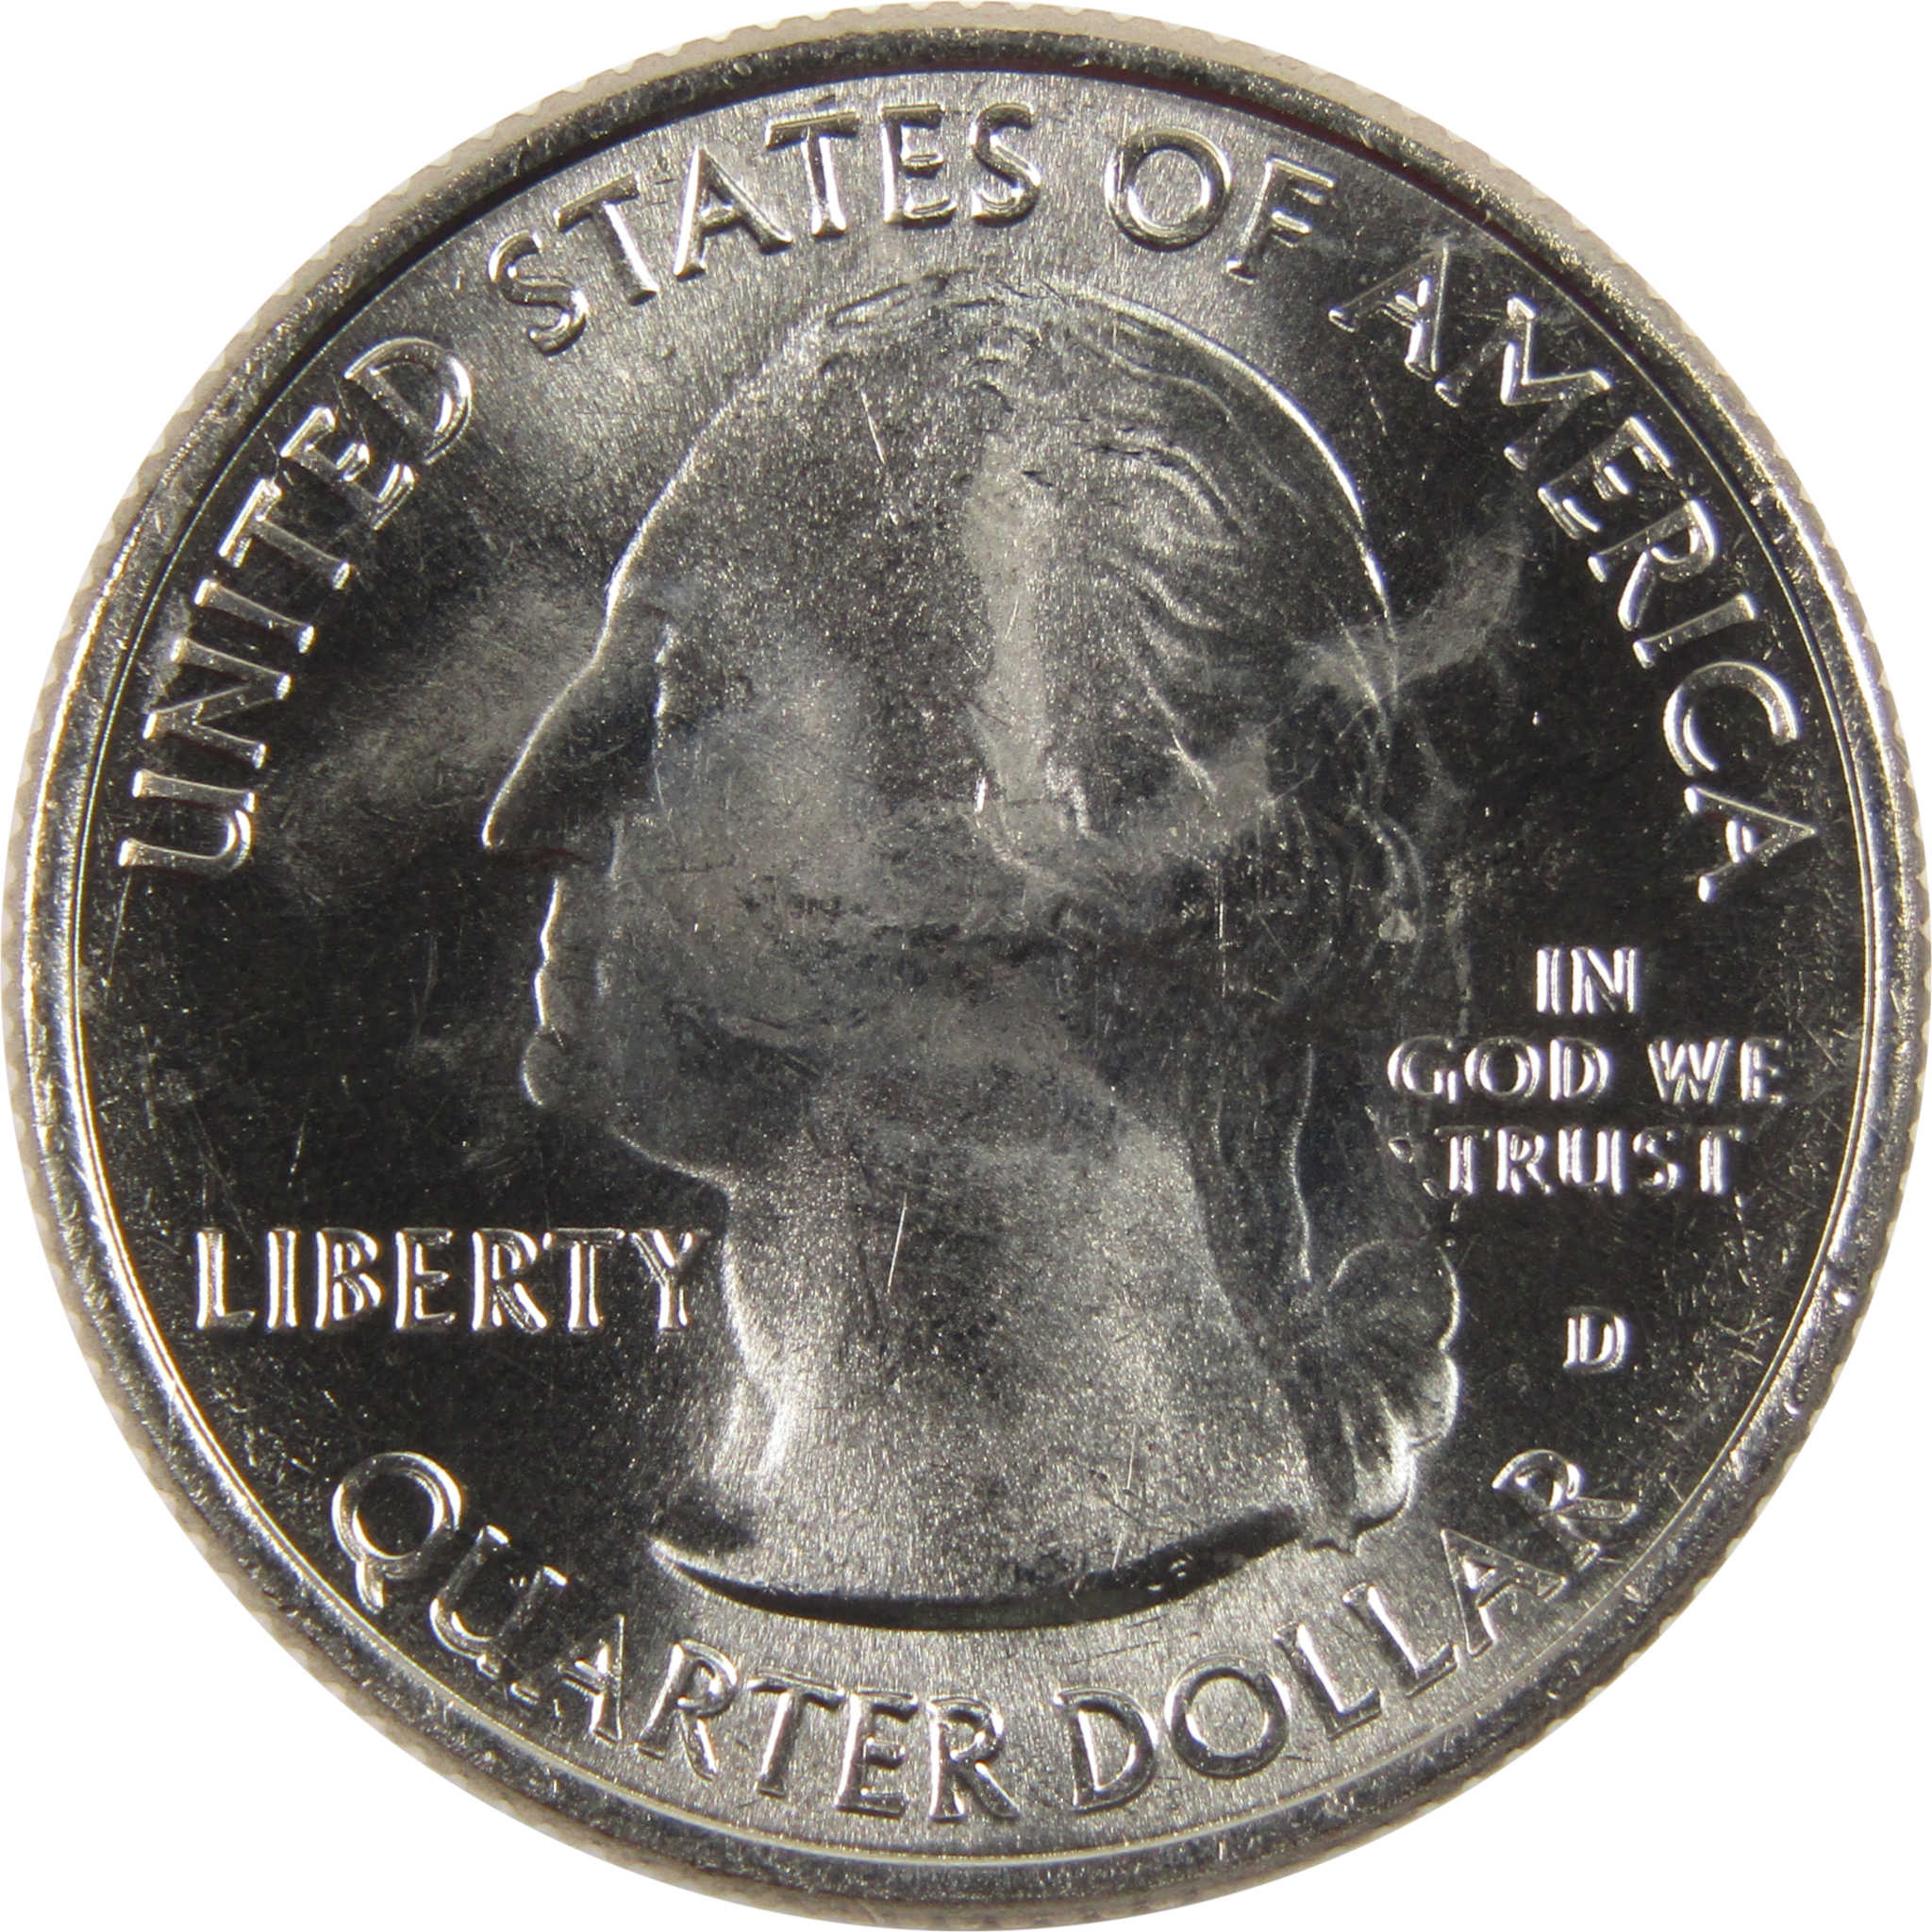 2013 D Perry's Victory National Park Quarter BU Uncirculated Clad 25c